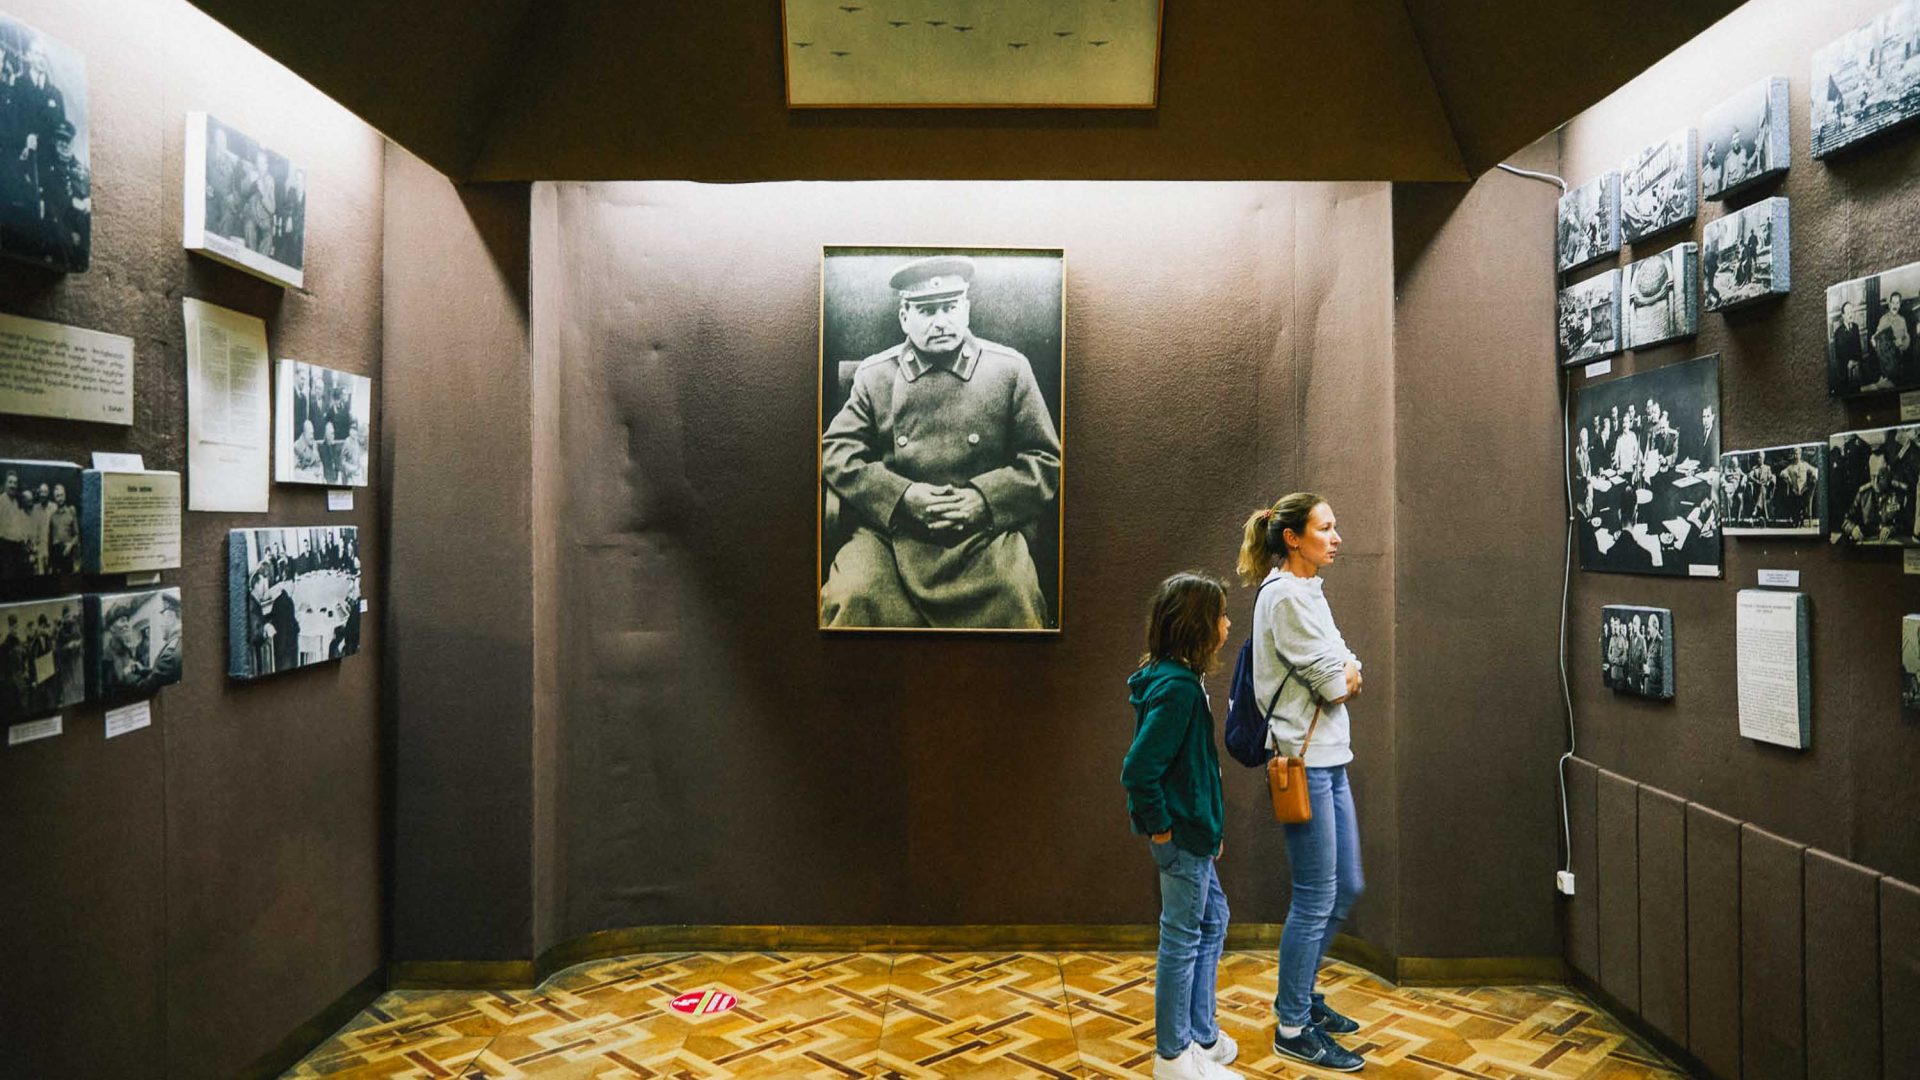 People look at the exhibition in the Stalin museum.